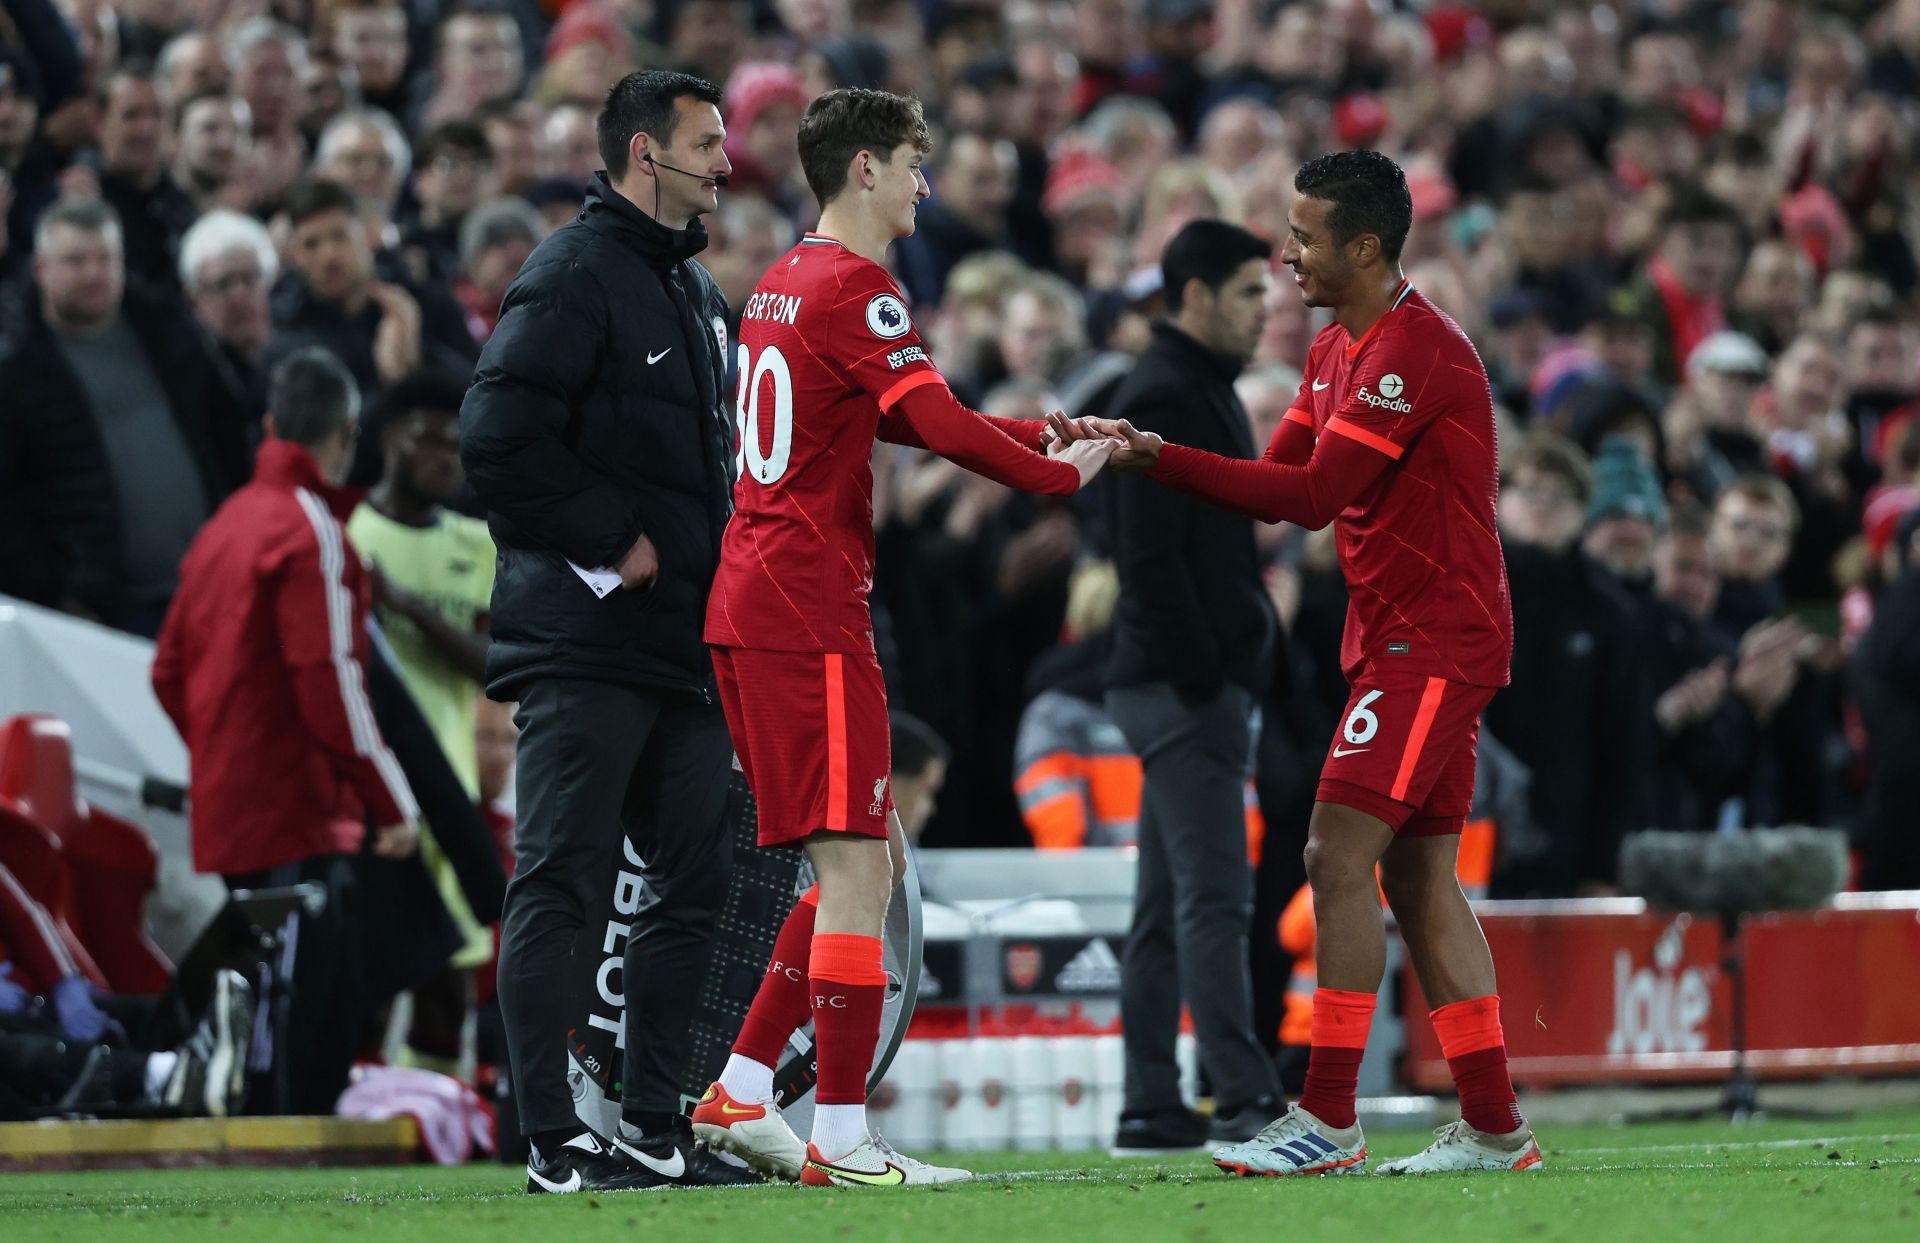 Liverpool coach Jurgen Klopp gave Tyler Morton a place on the bench against Arsenal due to injuries and later handed the youngster a late cameo.